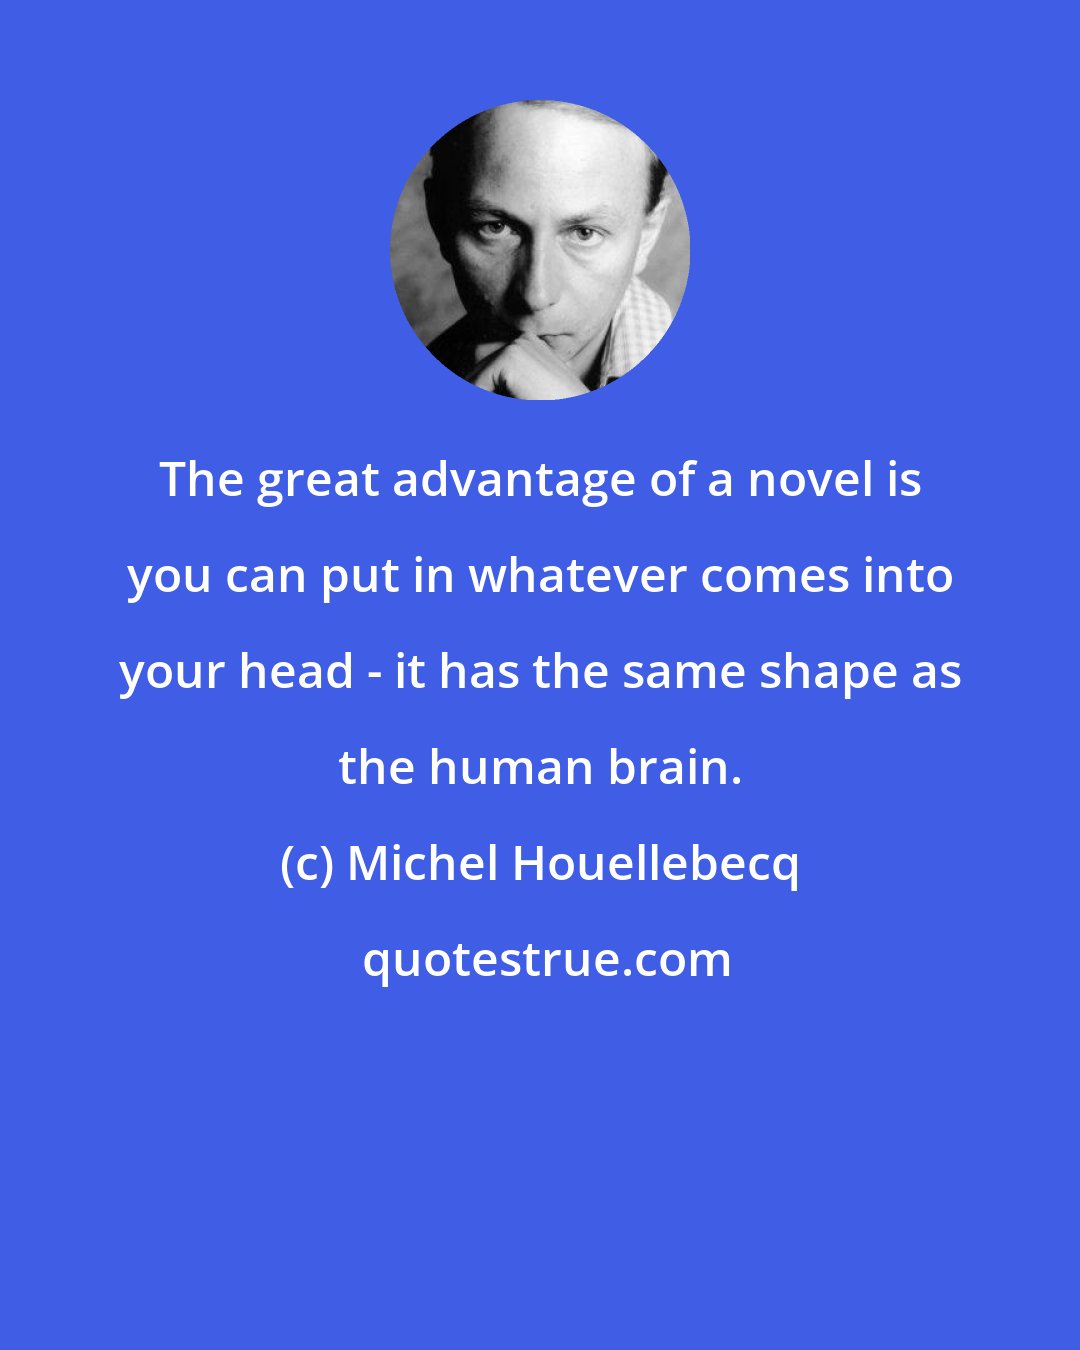 Michel Houellebecq: The great advantage of a novel is you can put in whatever comes into your head - it has the same shape as the human brain.